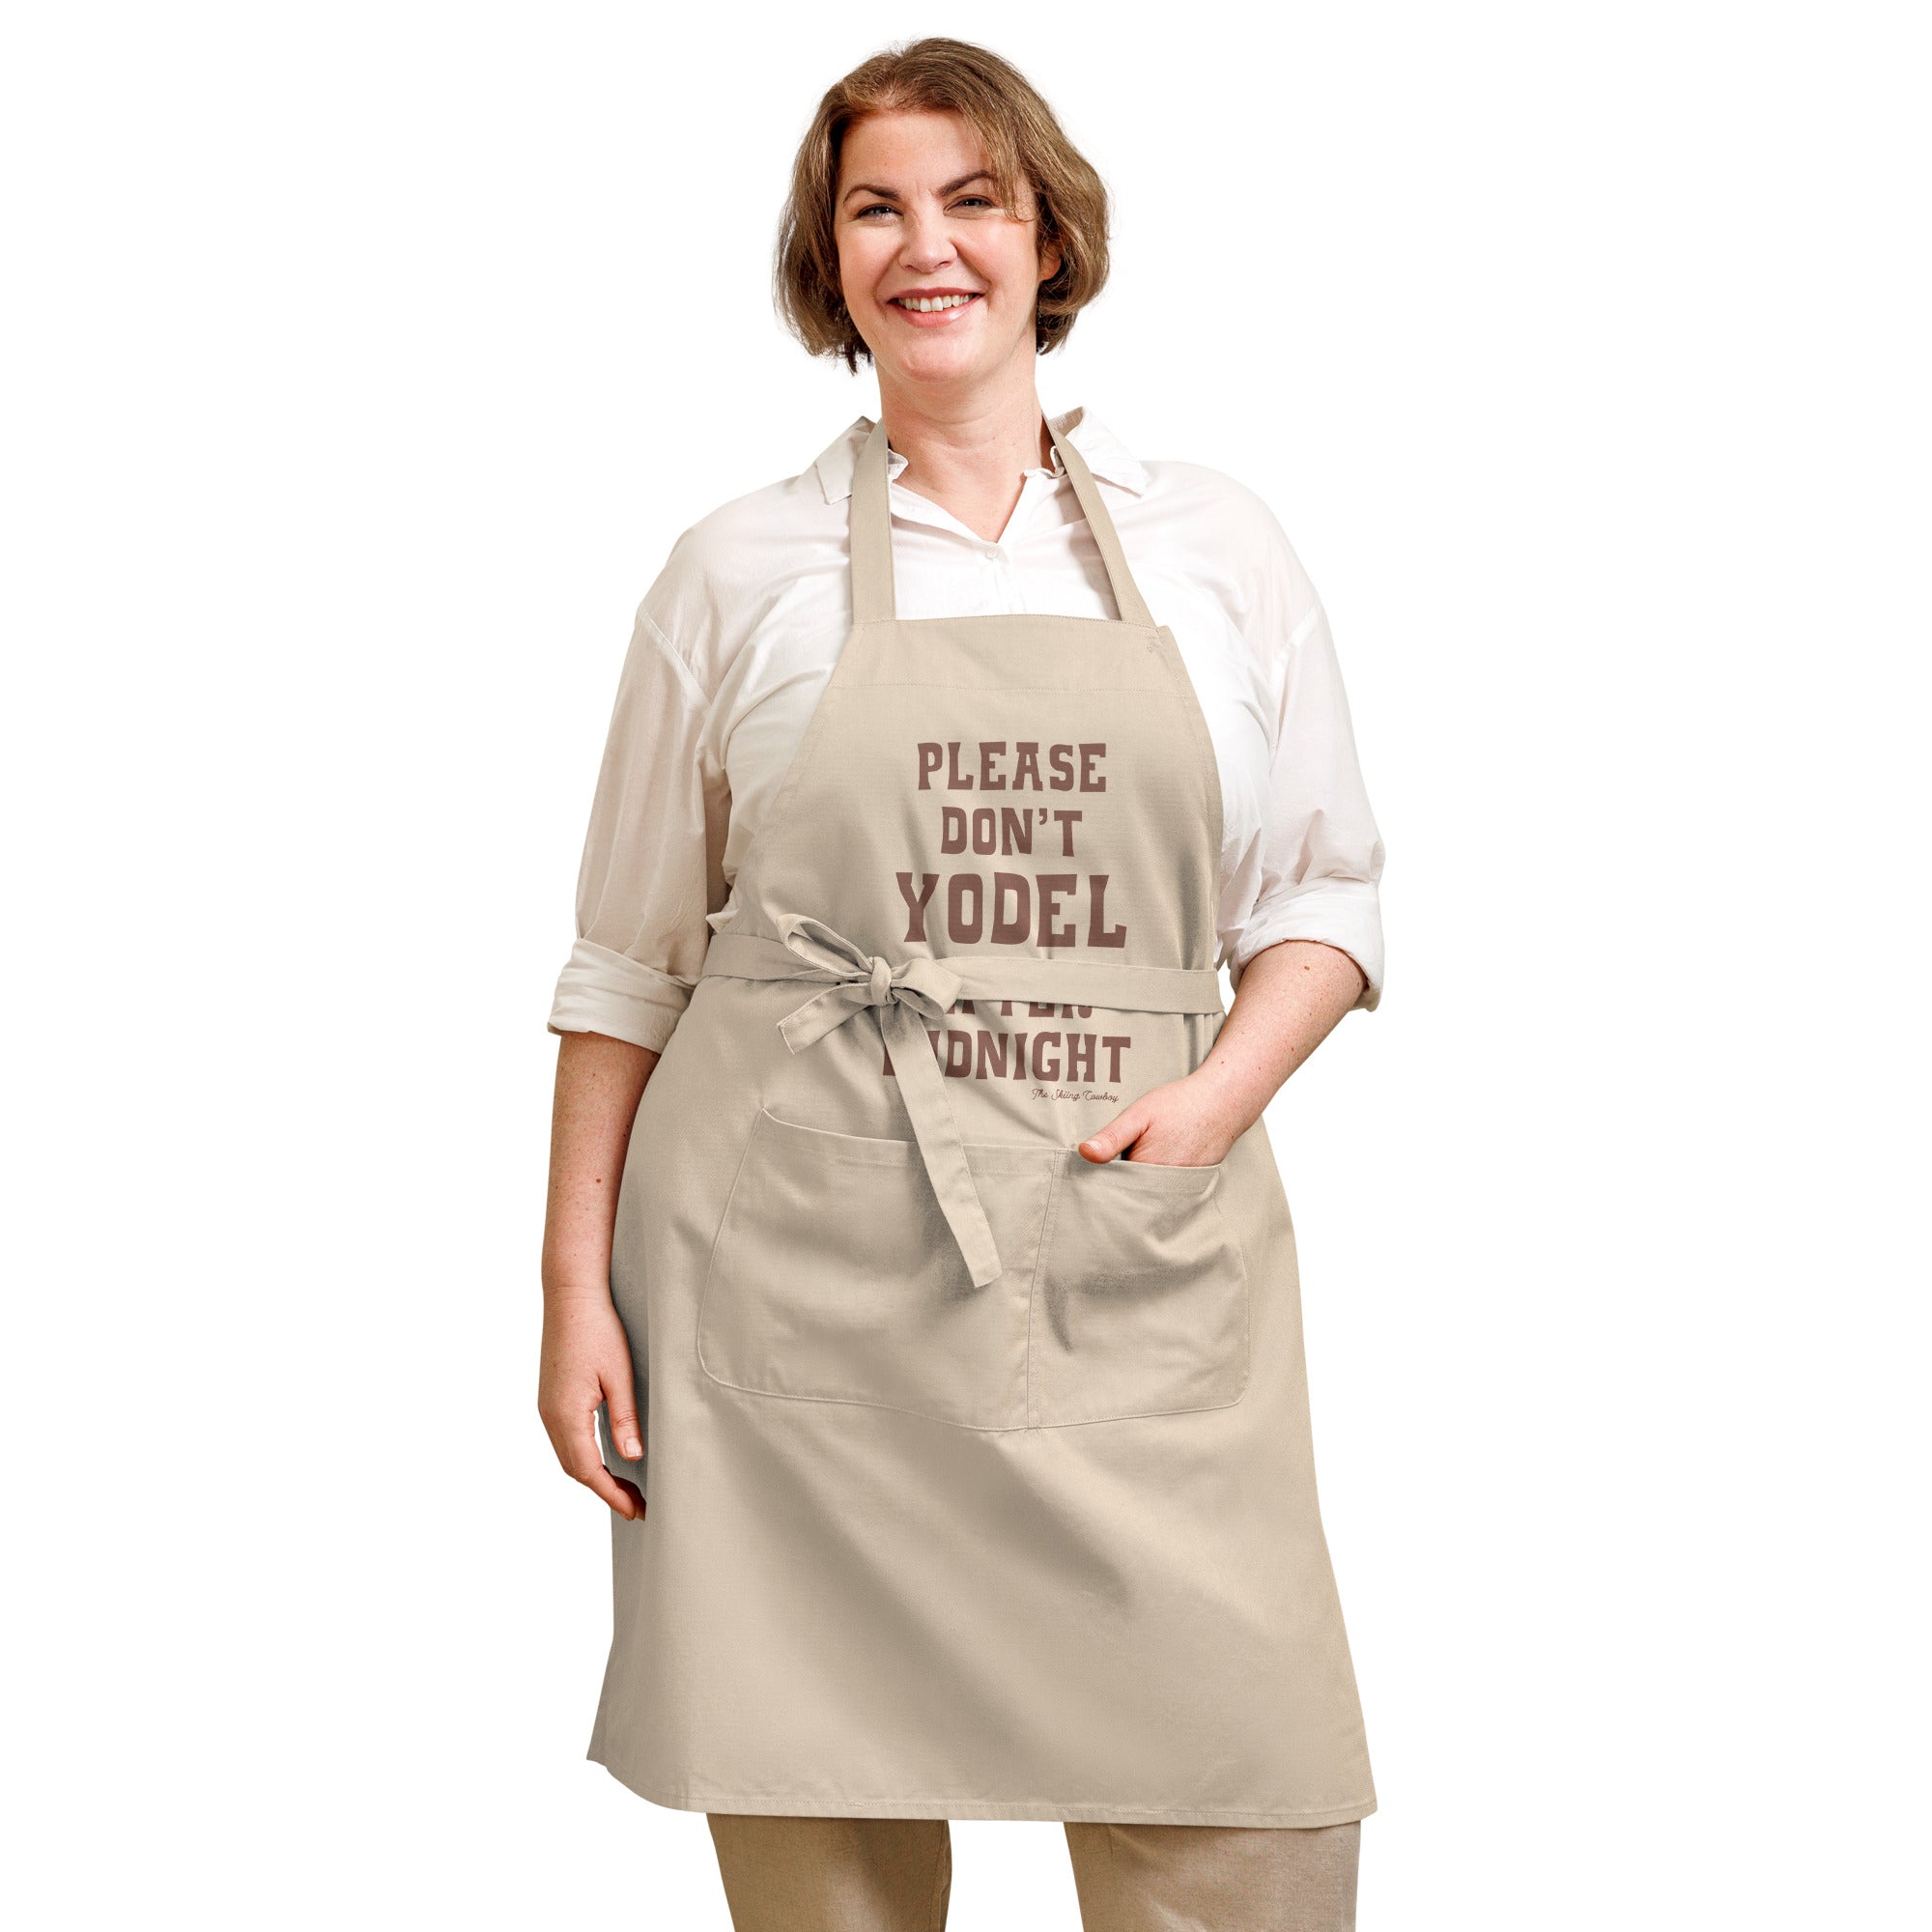 Organic cotton apron Don't Yodel After Midnight dark text